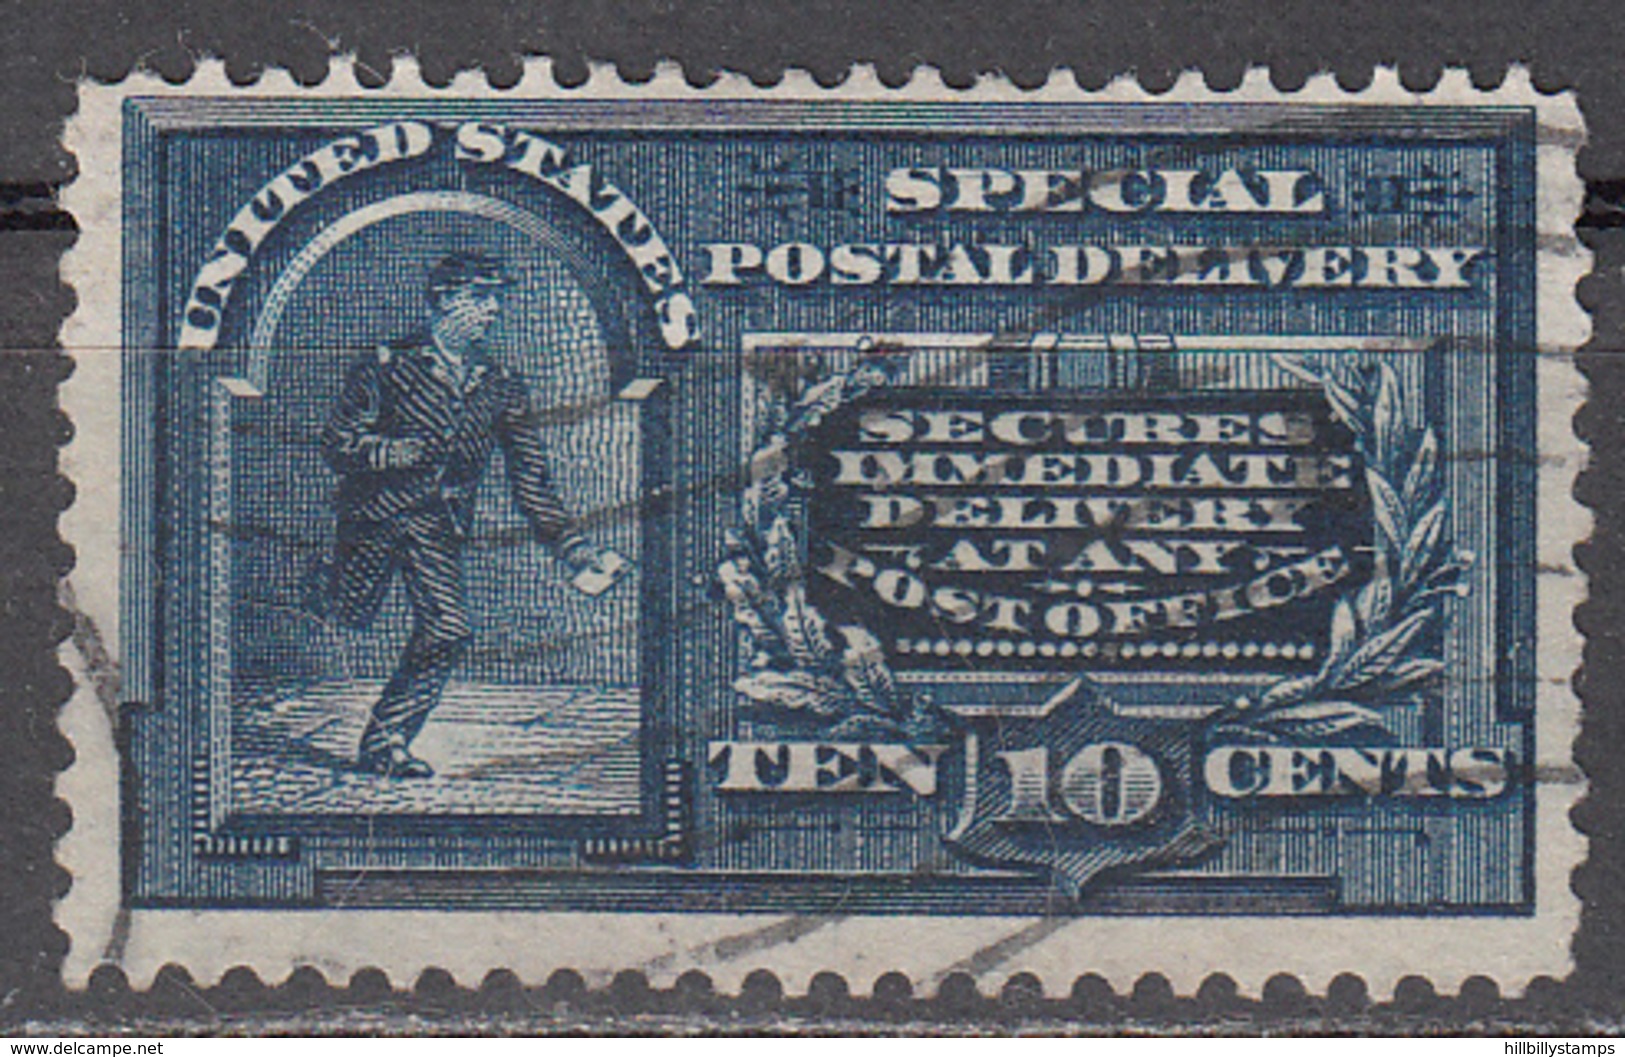 UNITED STATES     SCOTT NO. E5A    USED      YEAR  1895   WMK-191 - Special Delivery, Registration & Certified